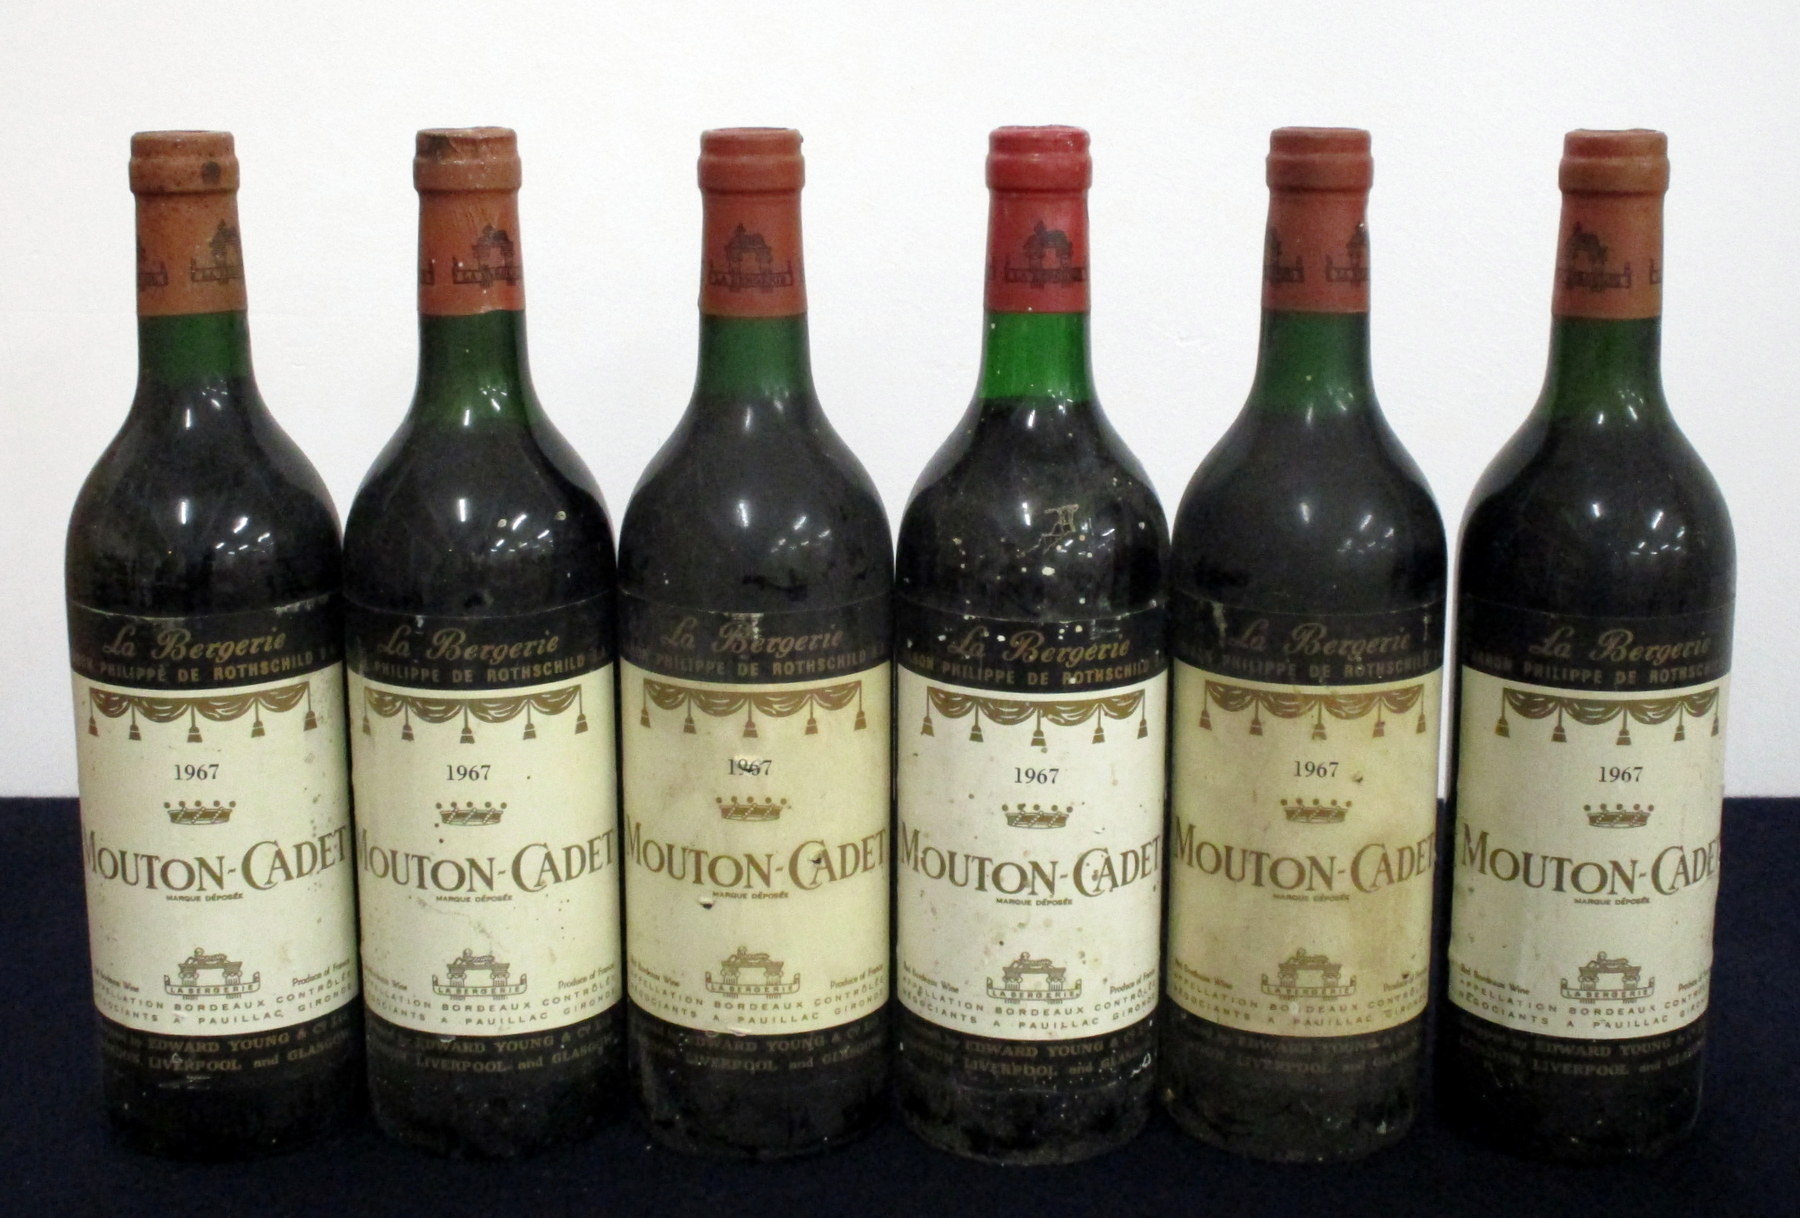 6 bts Mouton Cadet 1967 Bordeaux, 2 i.n, 2 vts, 2 ts, shipped by Edward Young & Co, bs/aged